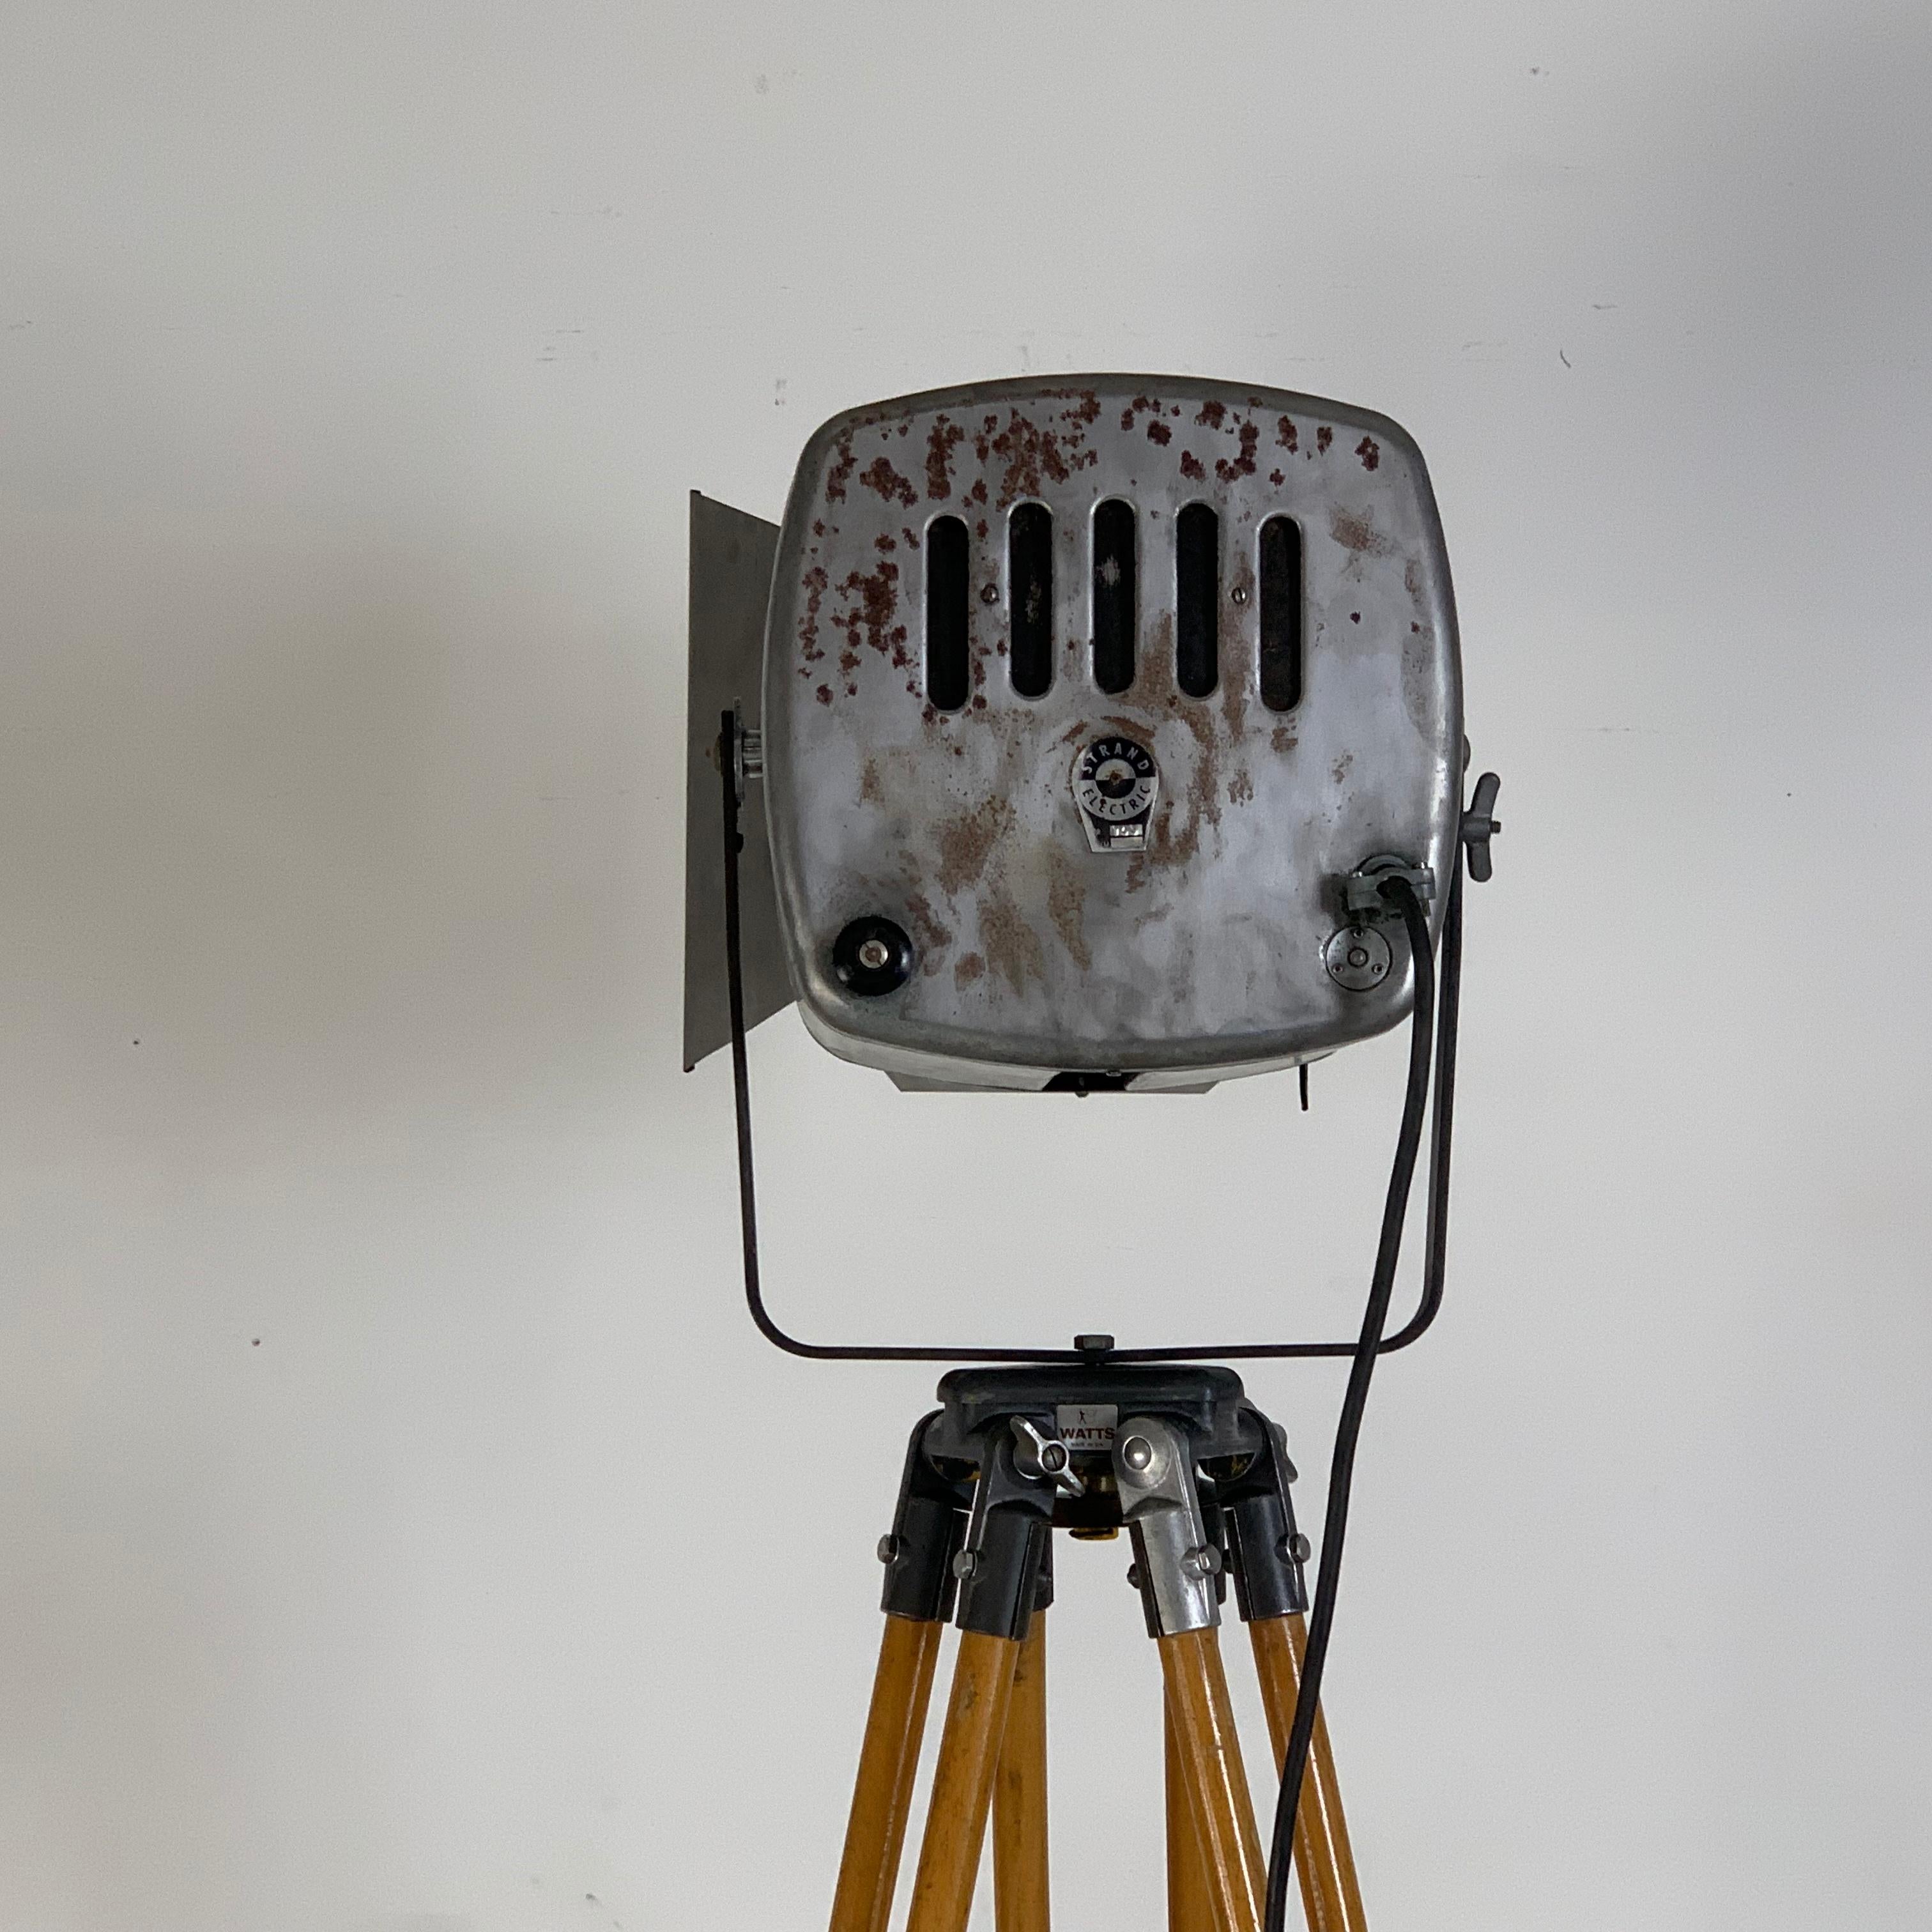 1960s Stripped and Polished Strand 743 Theatre Light on Vintage Wooden Tripod For Sale 4